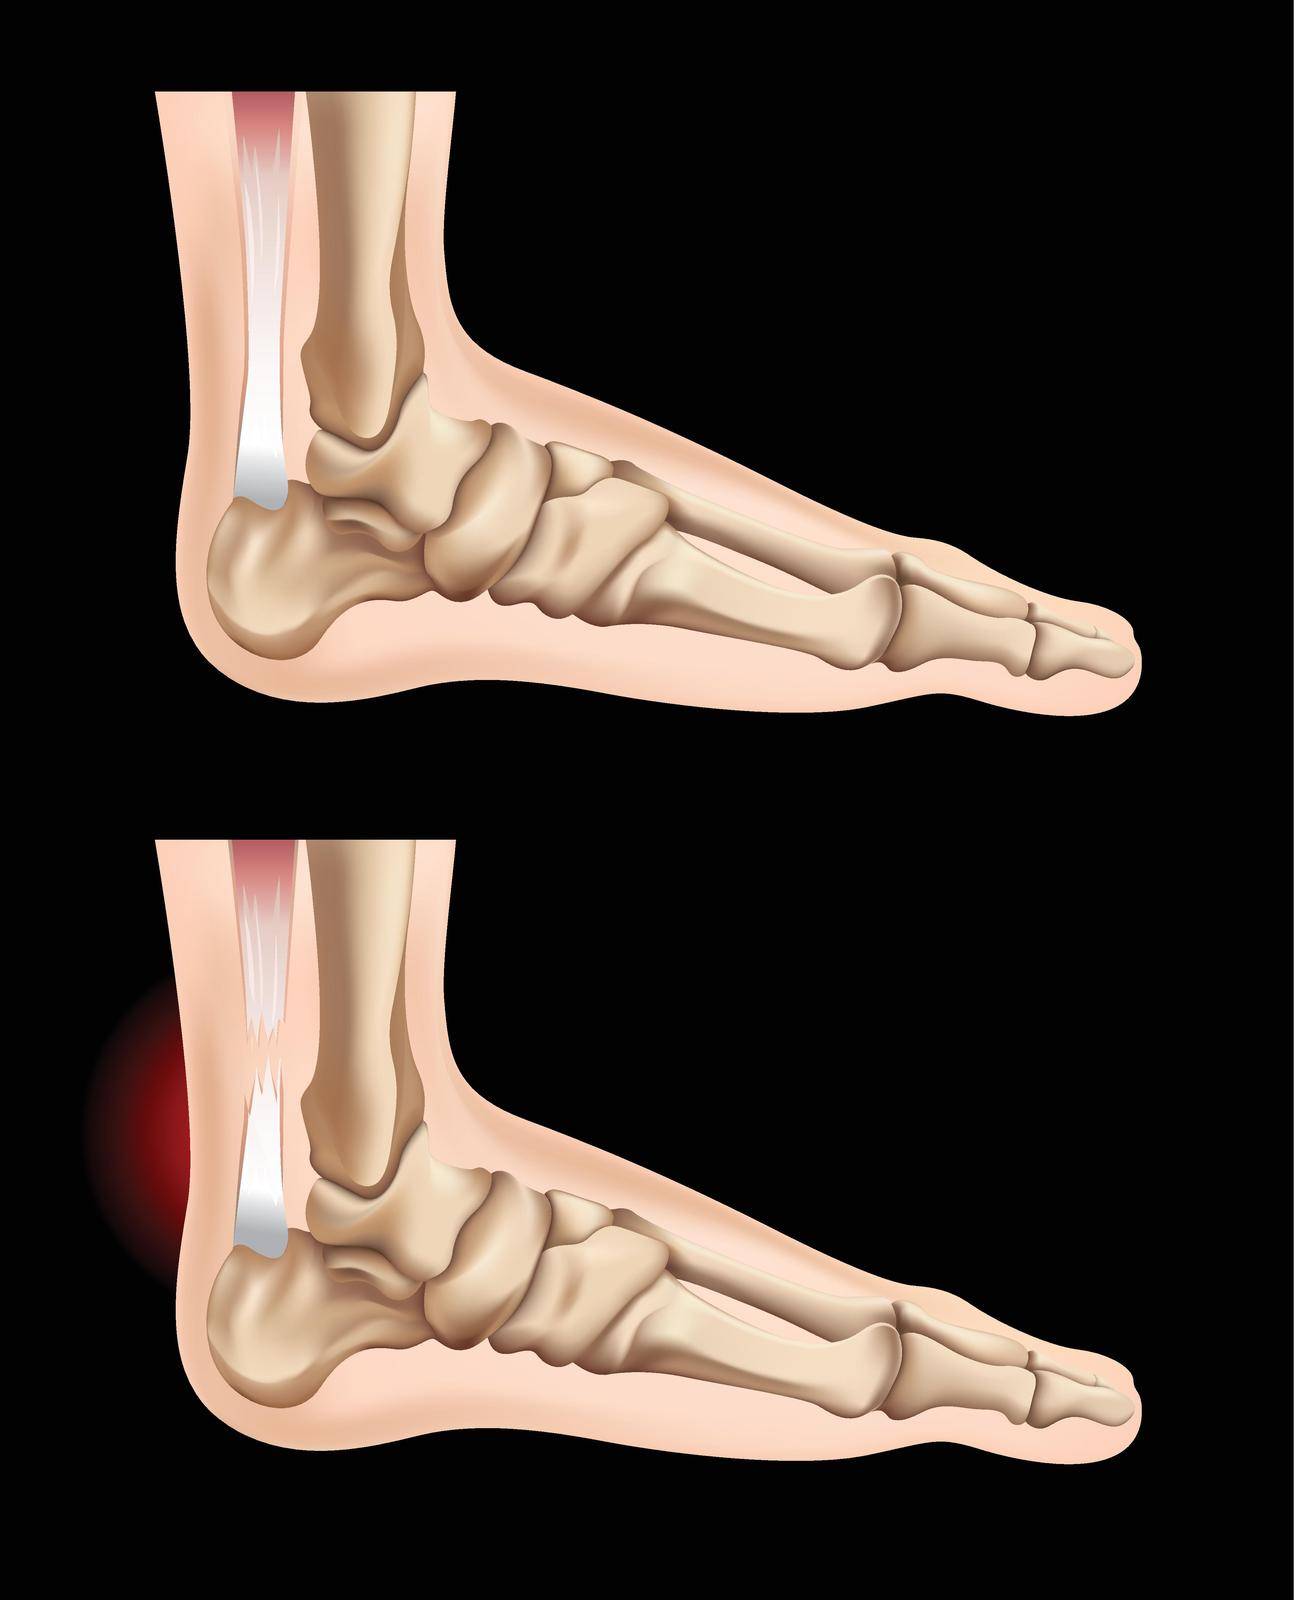 Human feet and injury in tendon illustration